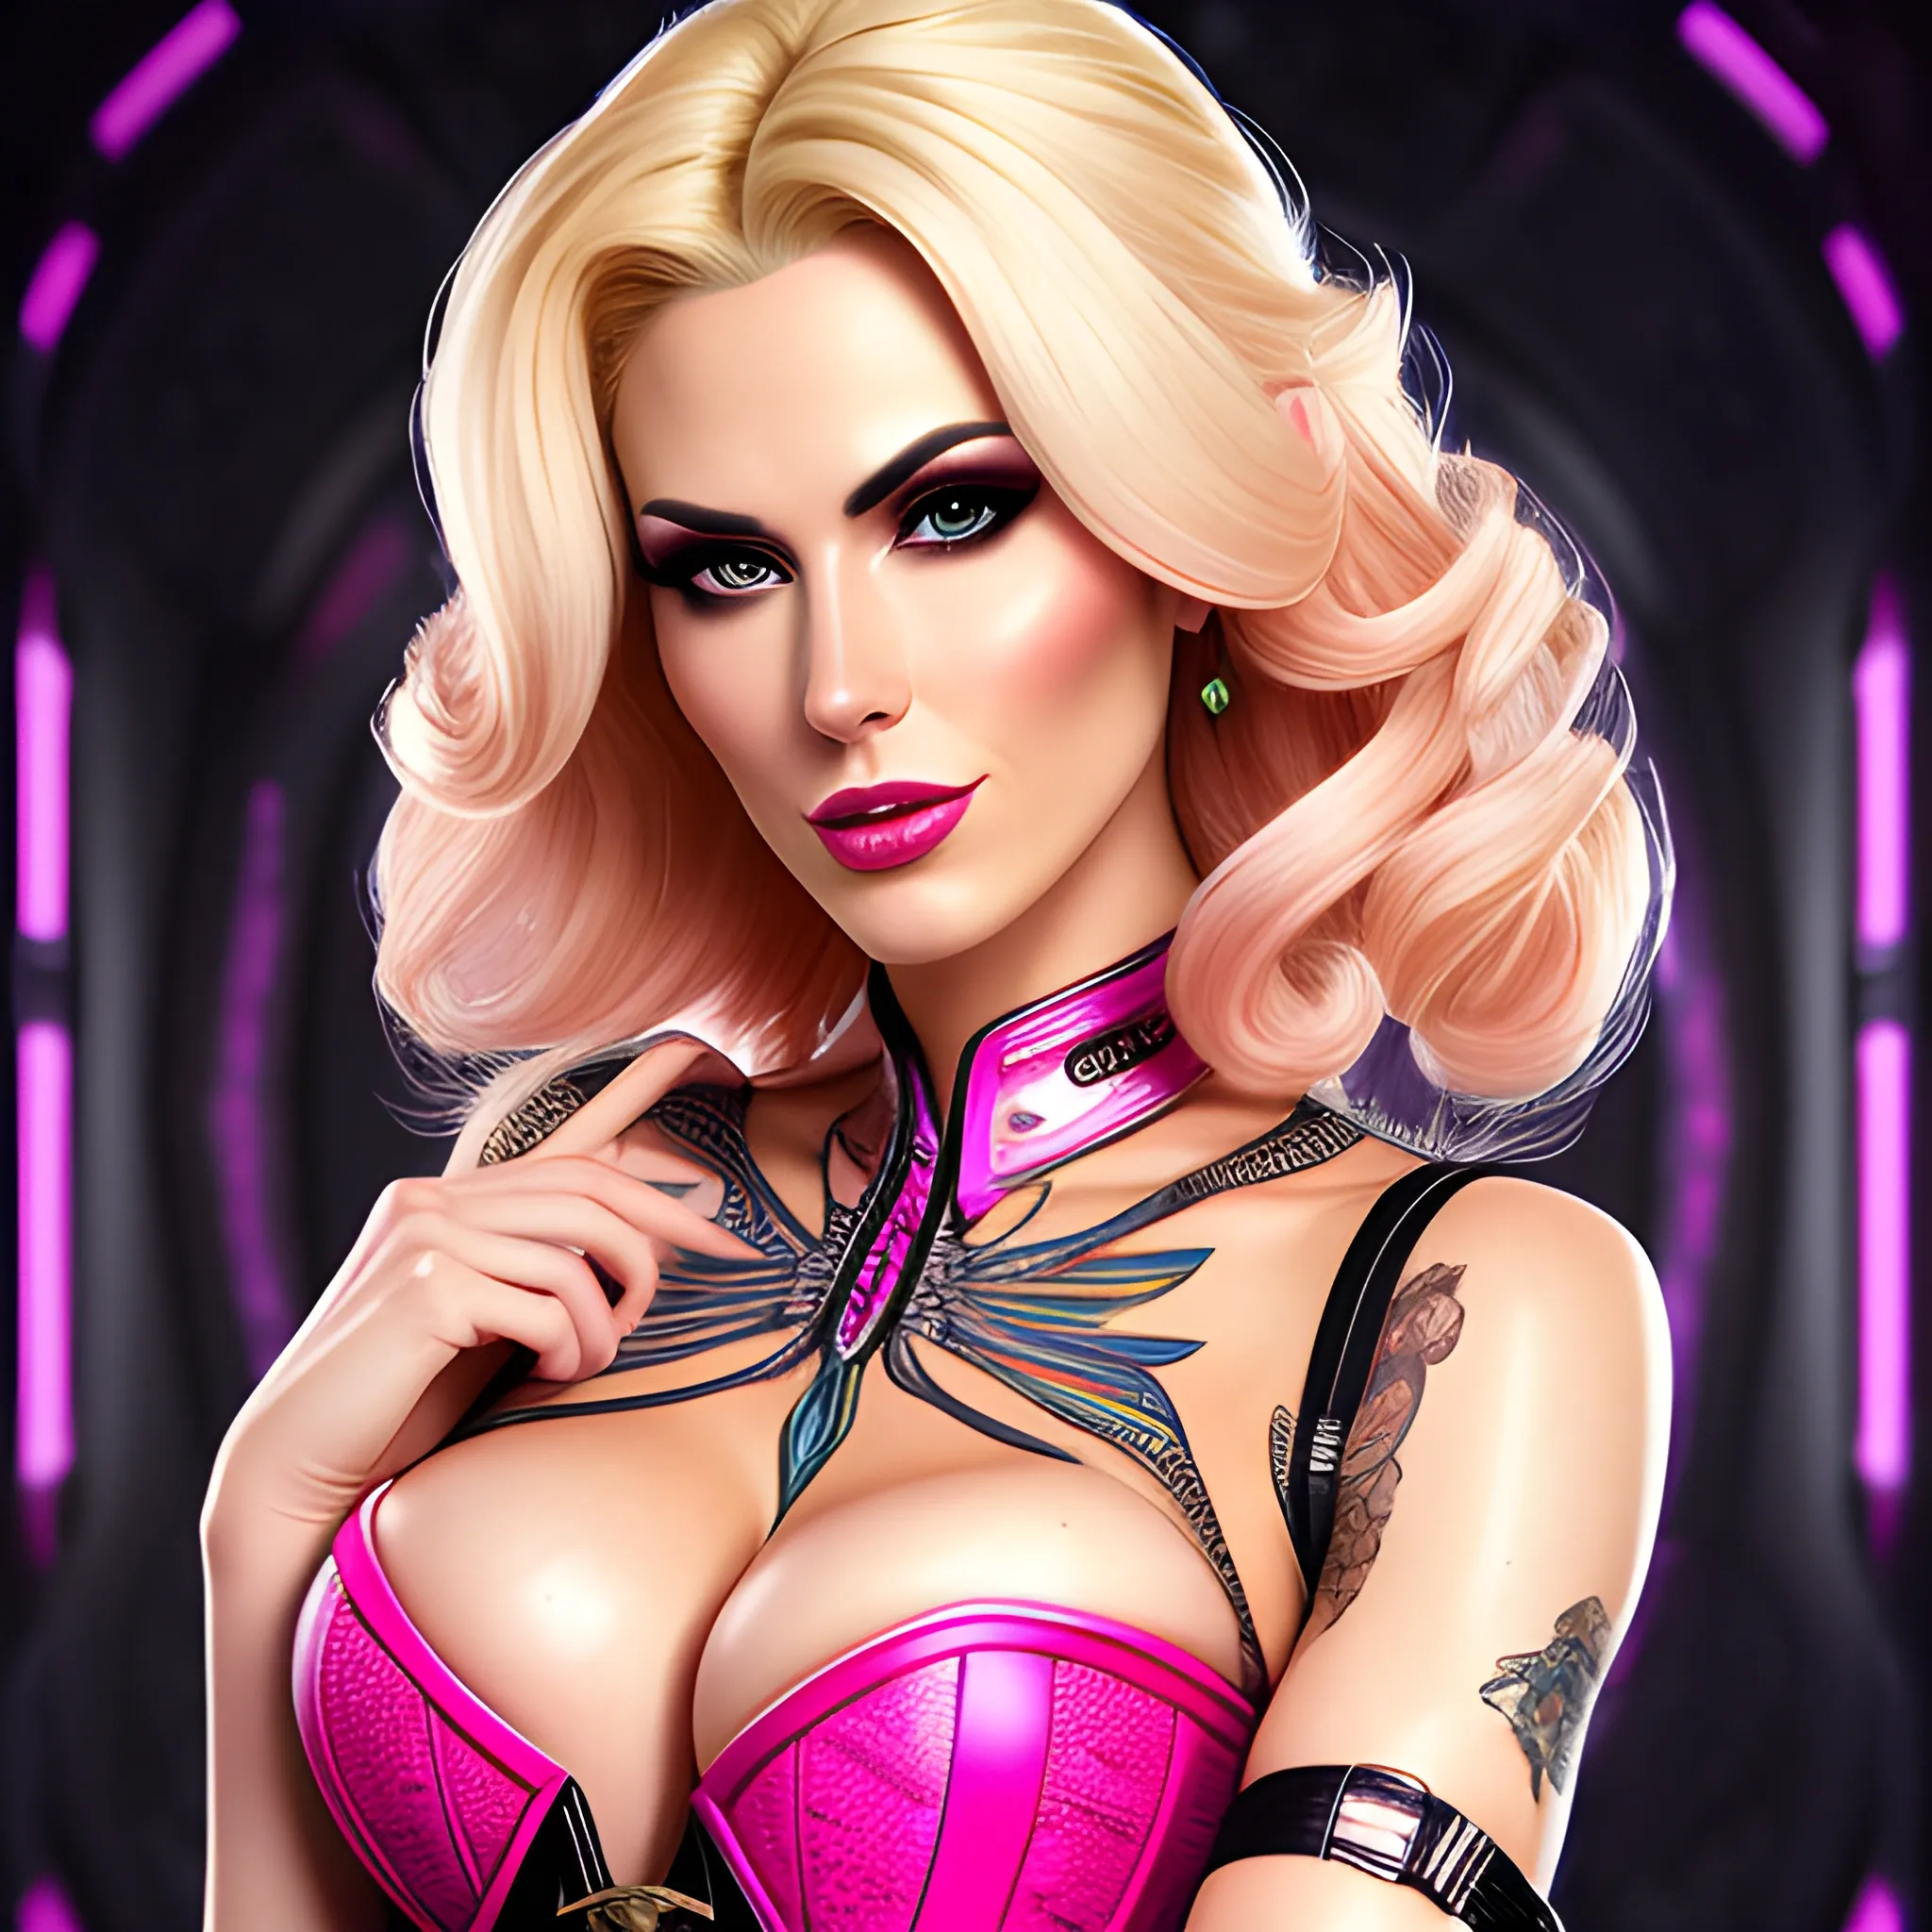 Beautiful girl, ultra high definition image, intricate pattern, she wearing pink corset, blonde hair, with sci-fi gun in left hand